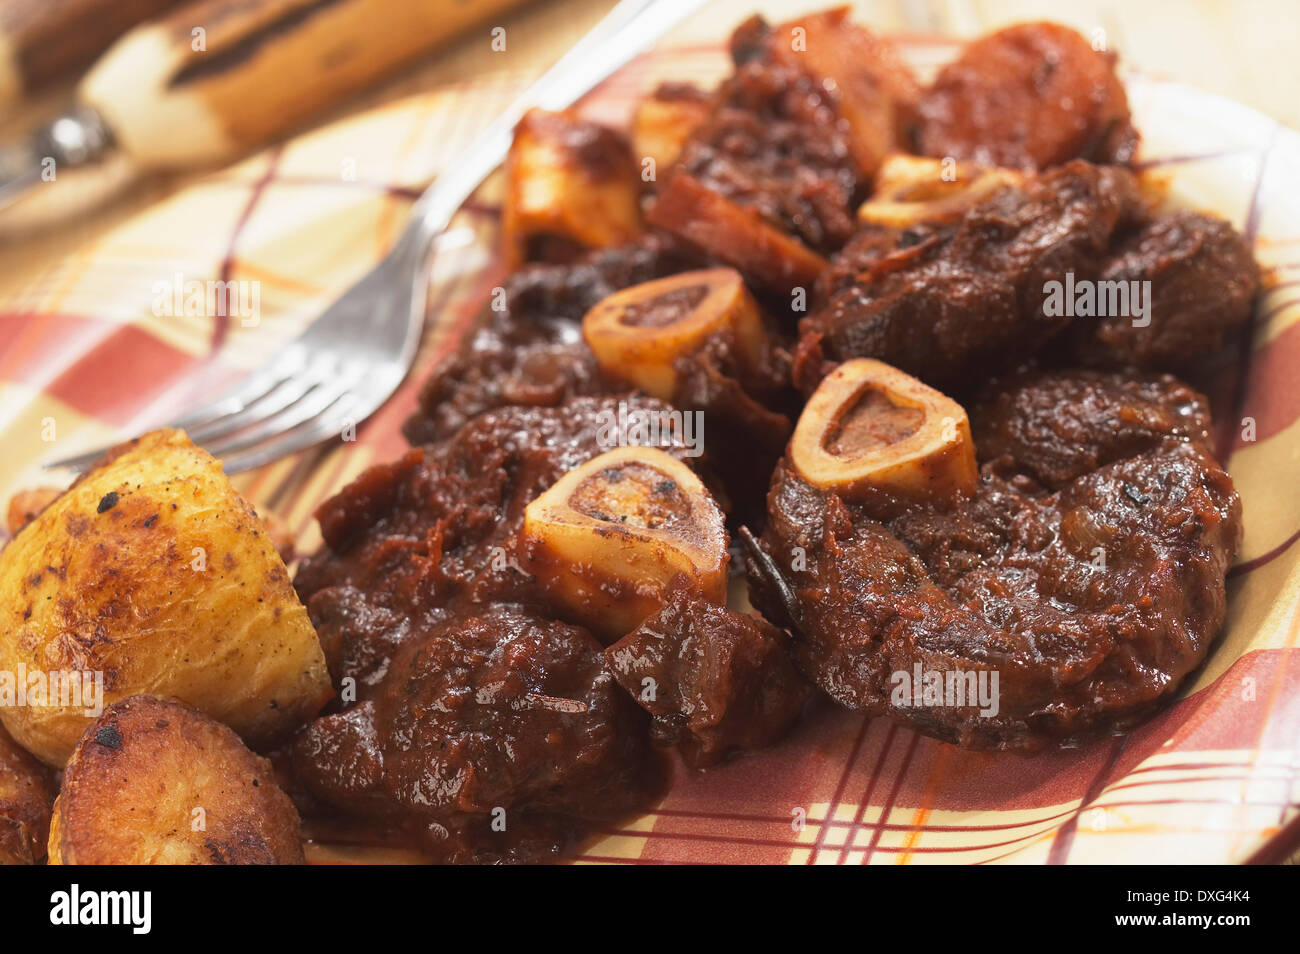 Plate Of Ossobucco Served With Roasted Potatoes Stock Photo